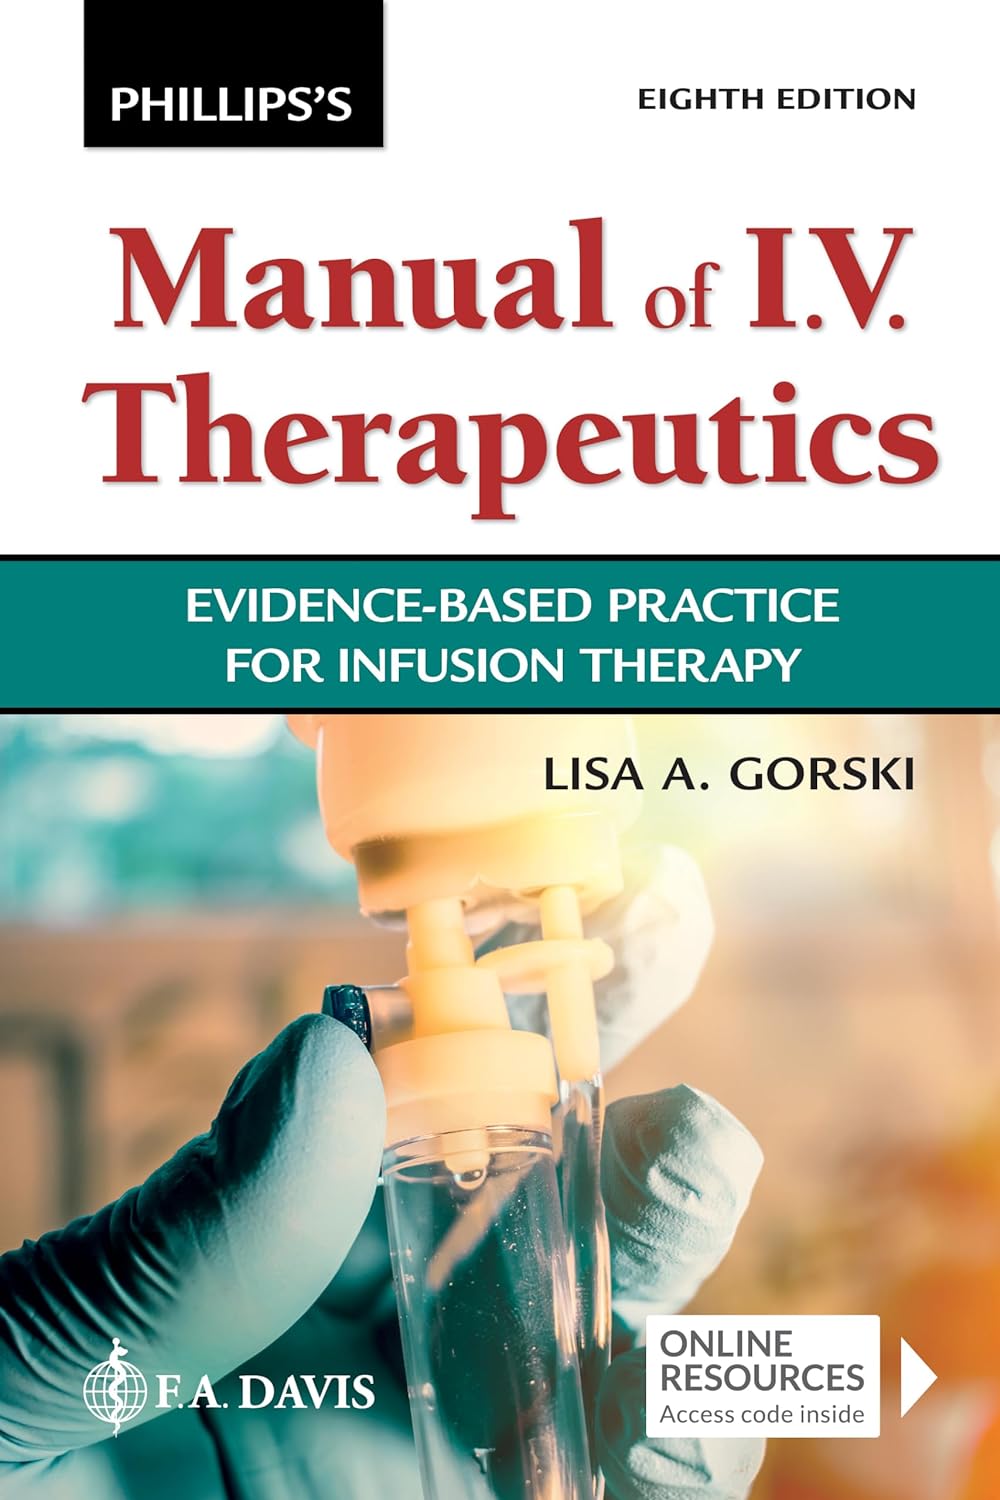 Phillips's Manual of I.V. Therapeutics: Evidence-Based Practice for Infusion Therapy (8th Edition) - eBook